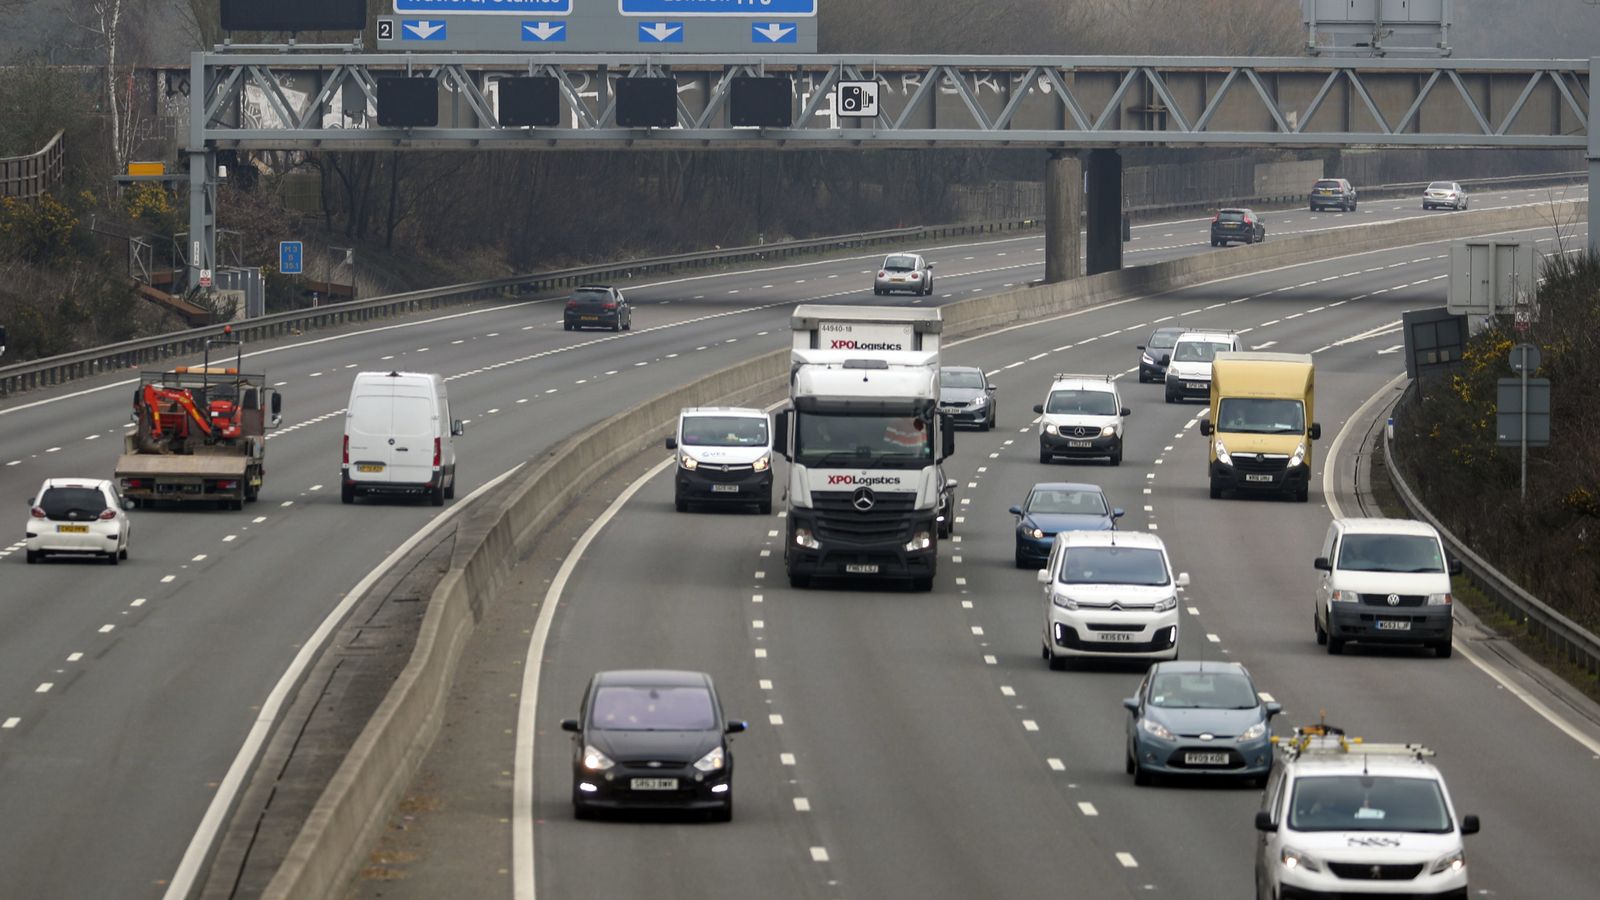 Rishi Sunak to ban new smart motorways following concerns about safety and cost